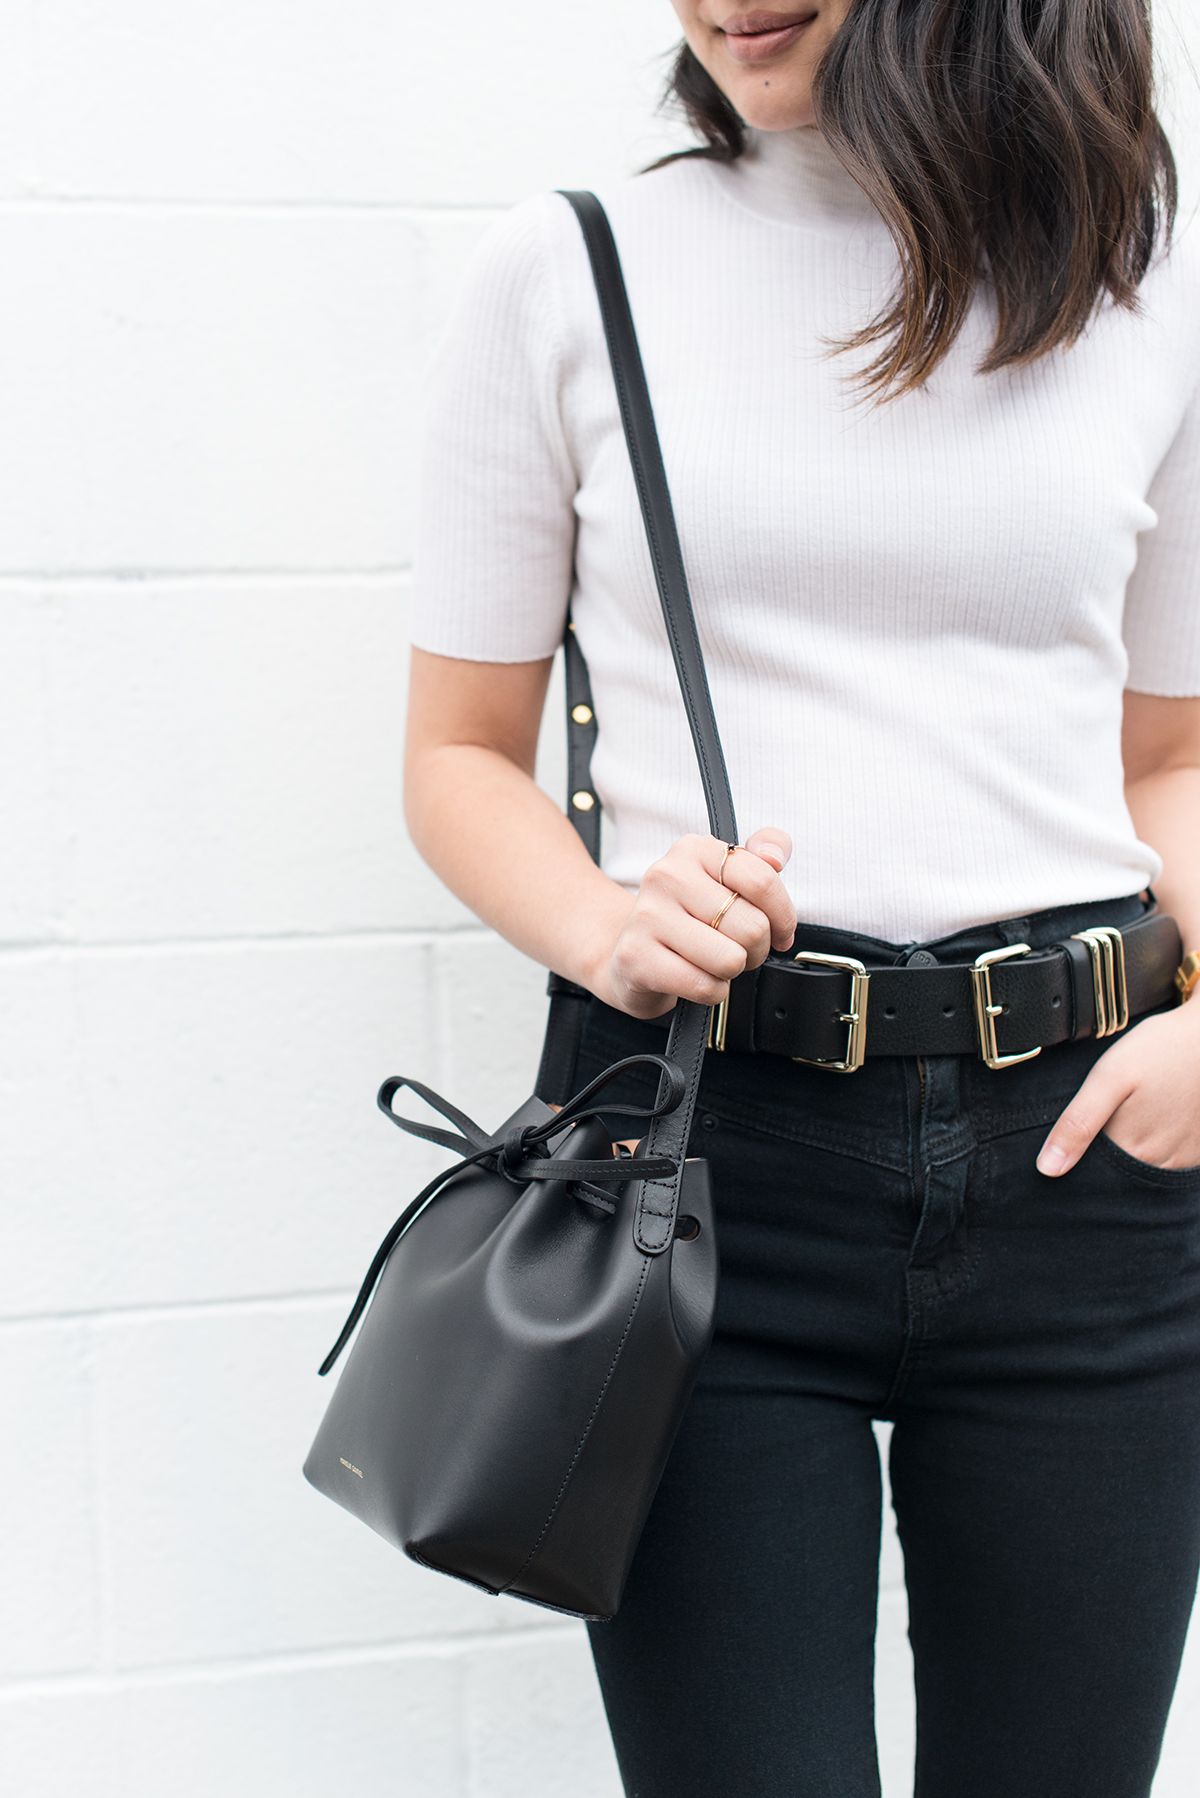 Bucket Bag Outfit Ideas That Every Fashionista Must Try